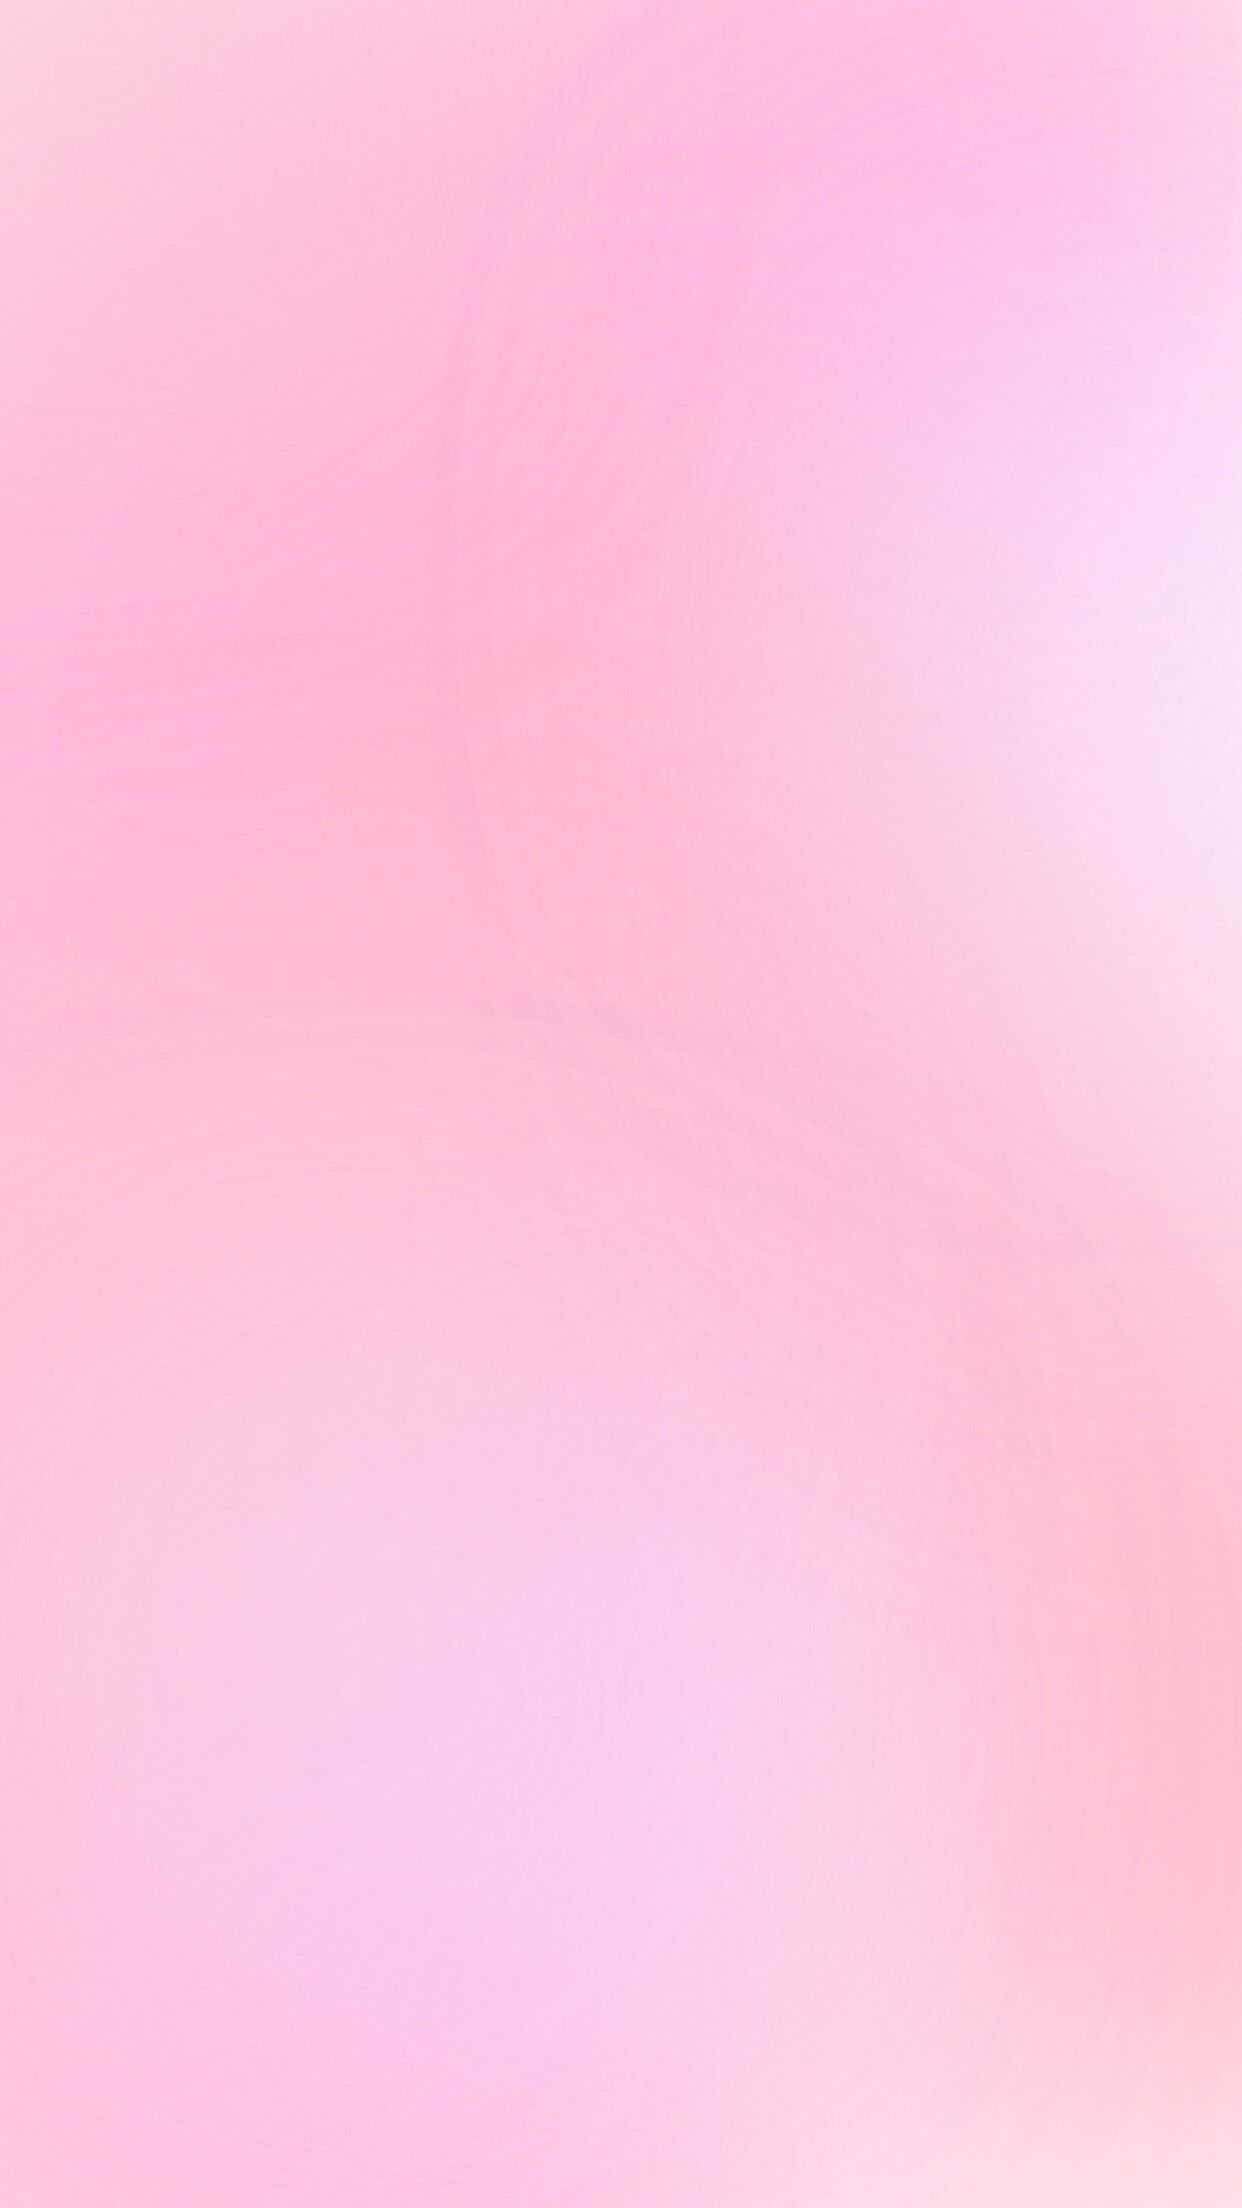 Pink Ombre Wallpaper - NawPic